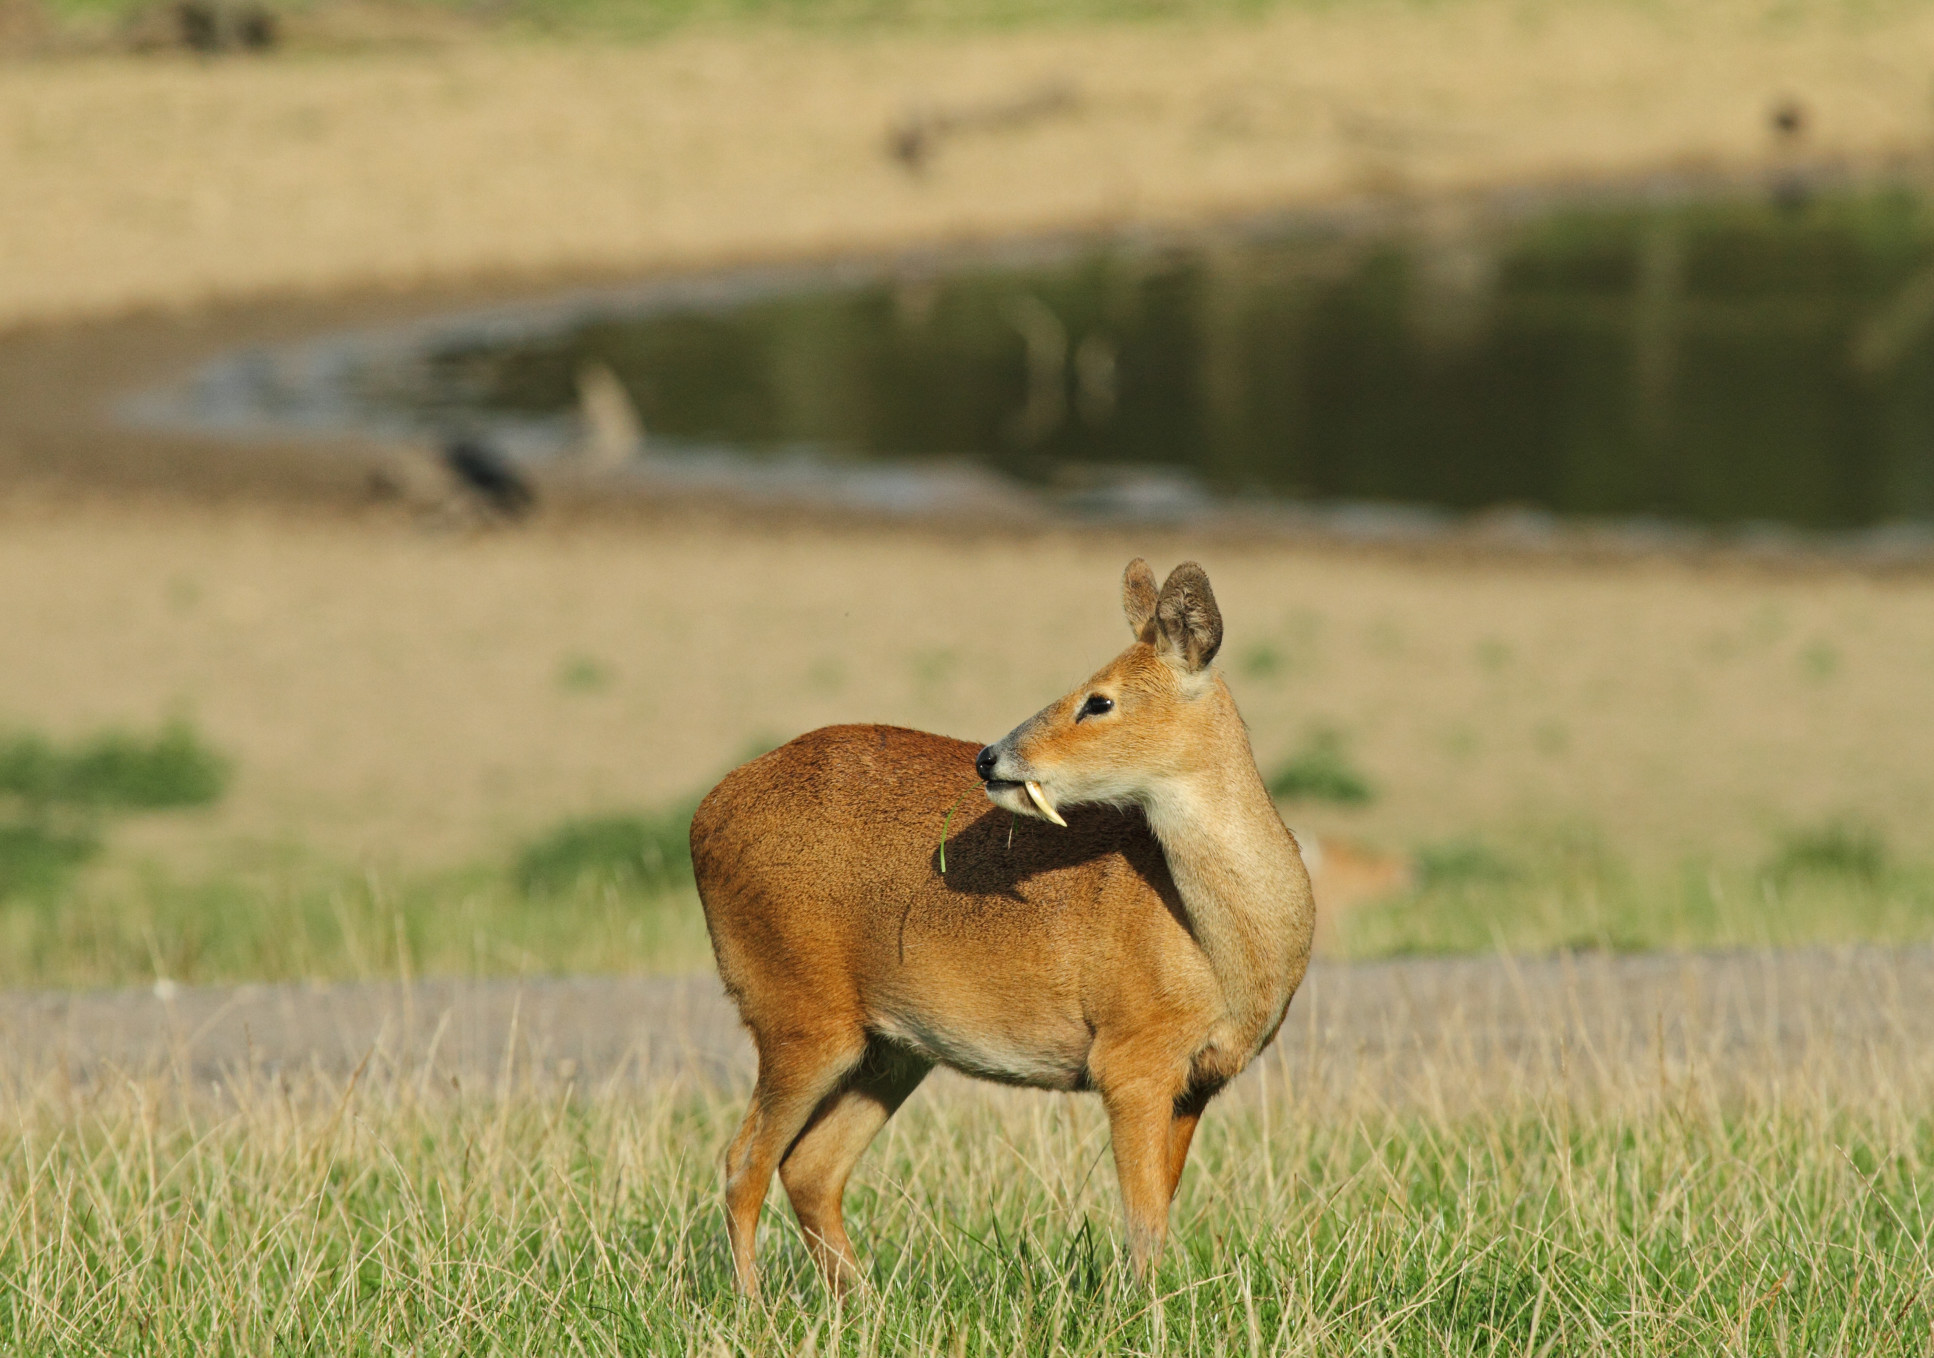 Chinese water deer in grass showing tusks